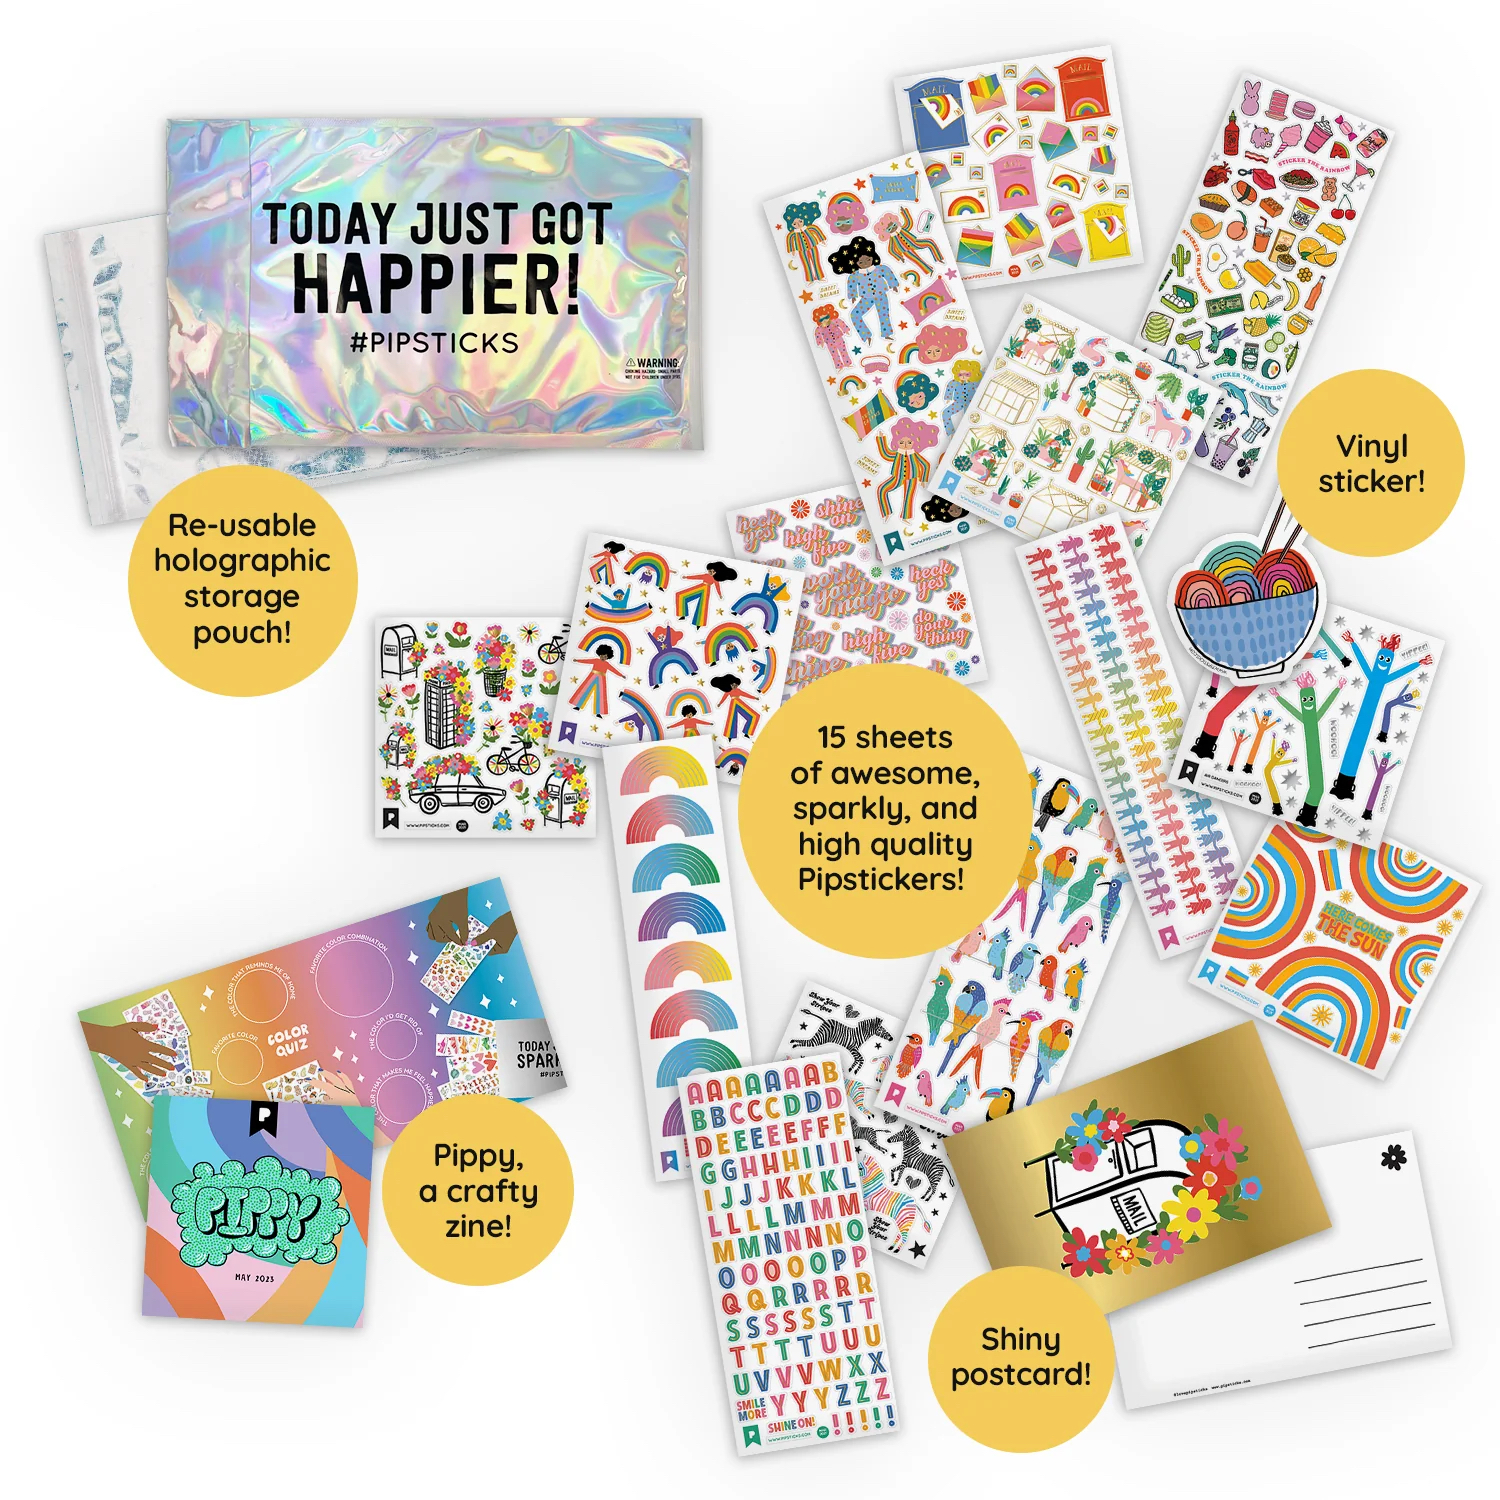 A sample of the Pipsticks Sticker Club offers